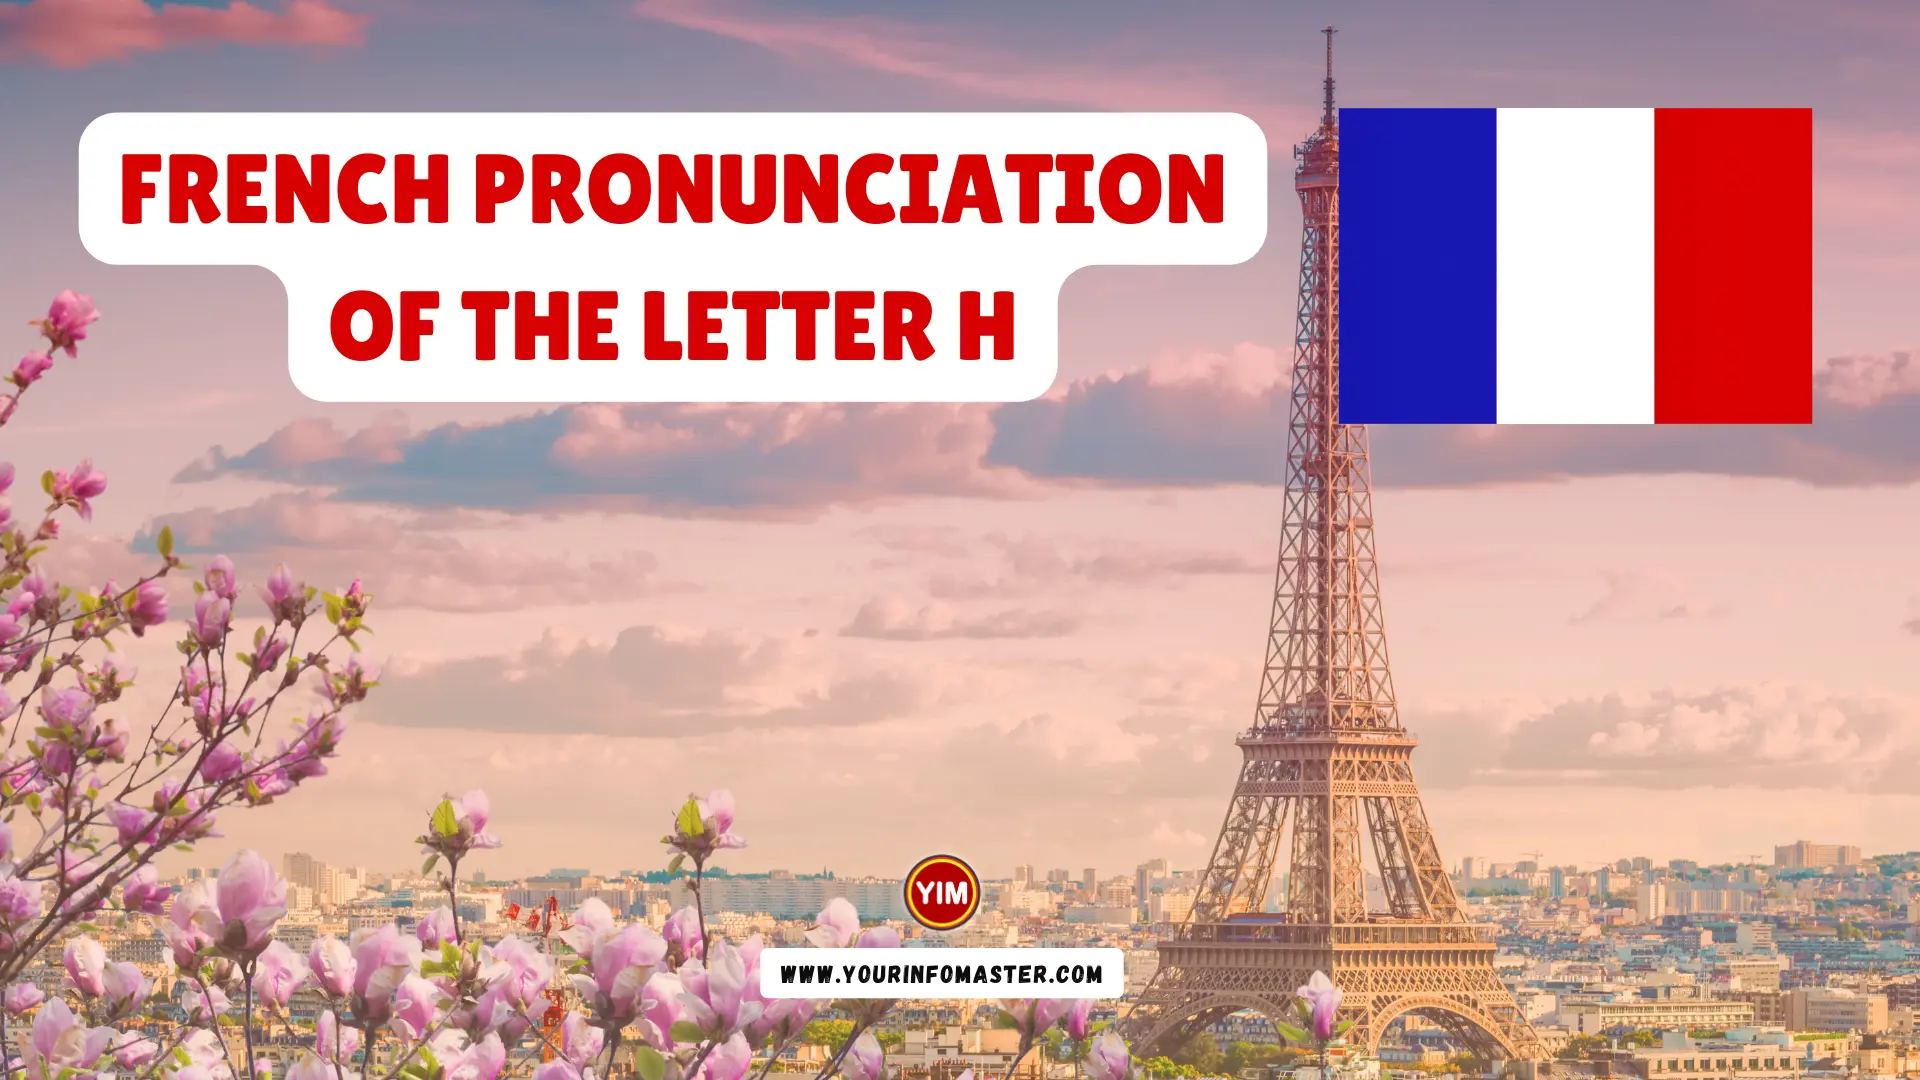 French Pronunciation of the Letter H